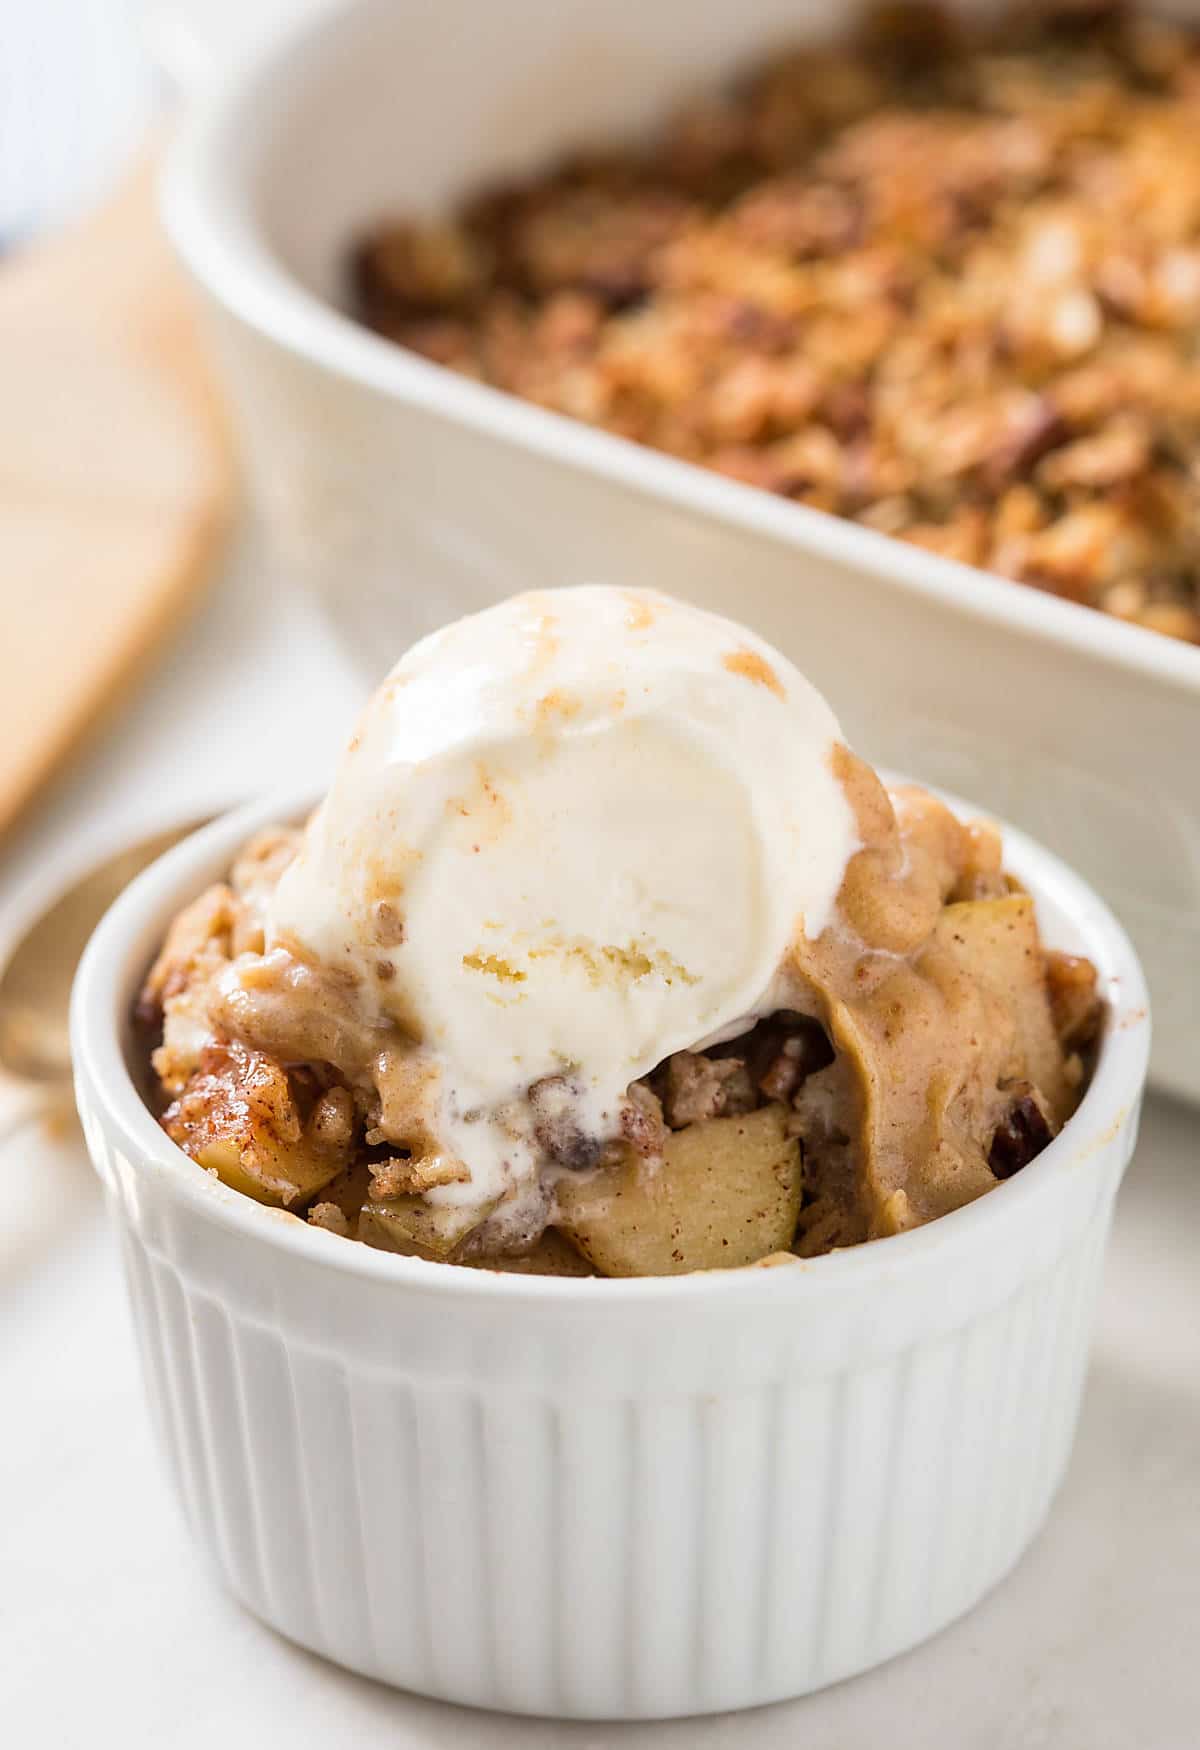 Delicious healthy apple crisp recipe to utilize those fresh apples in the season. It is totally a game changer.